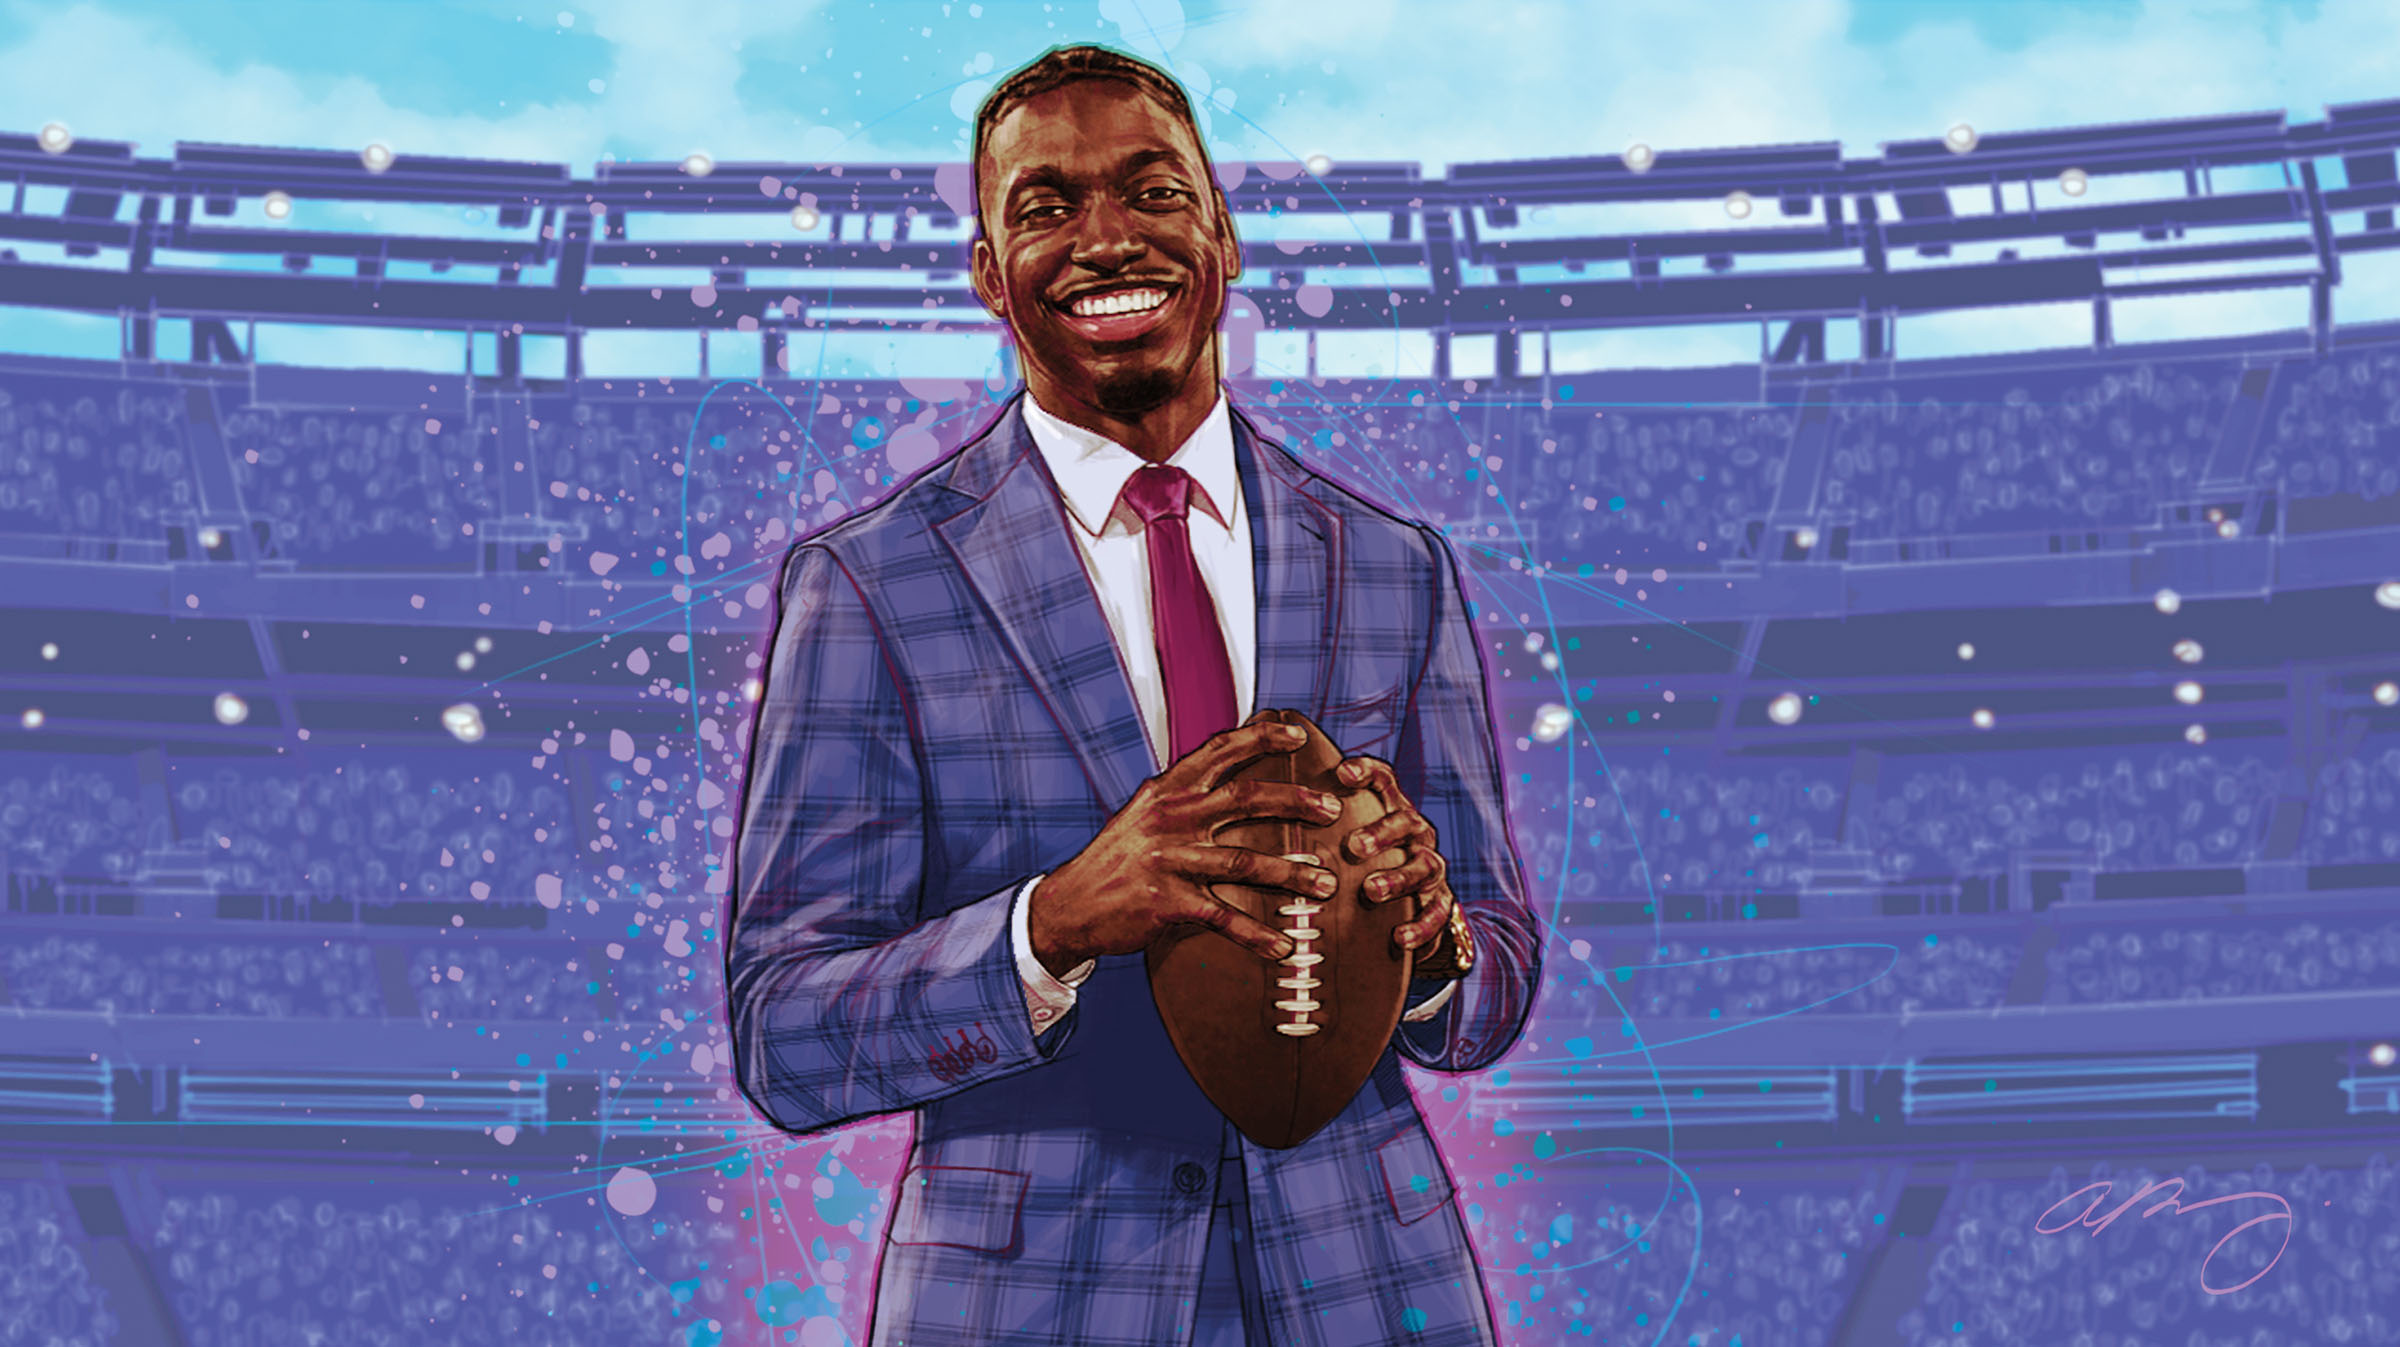 An illustration of a man wearing a bluish-purple suit holding a football